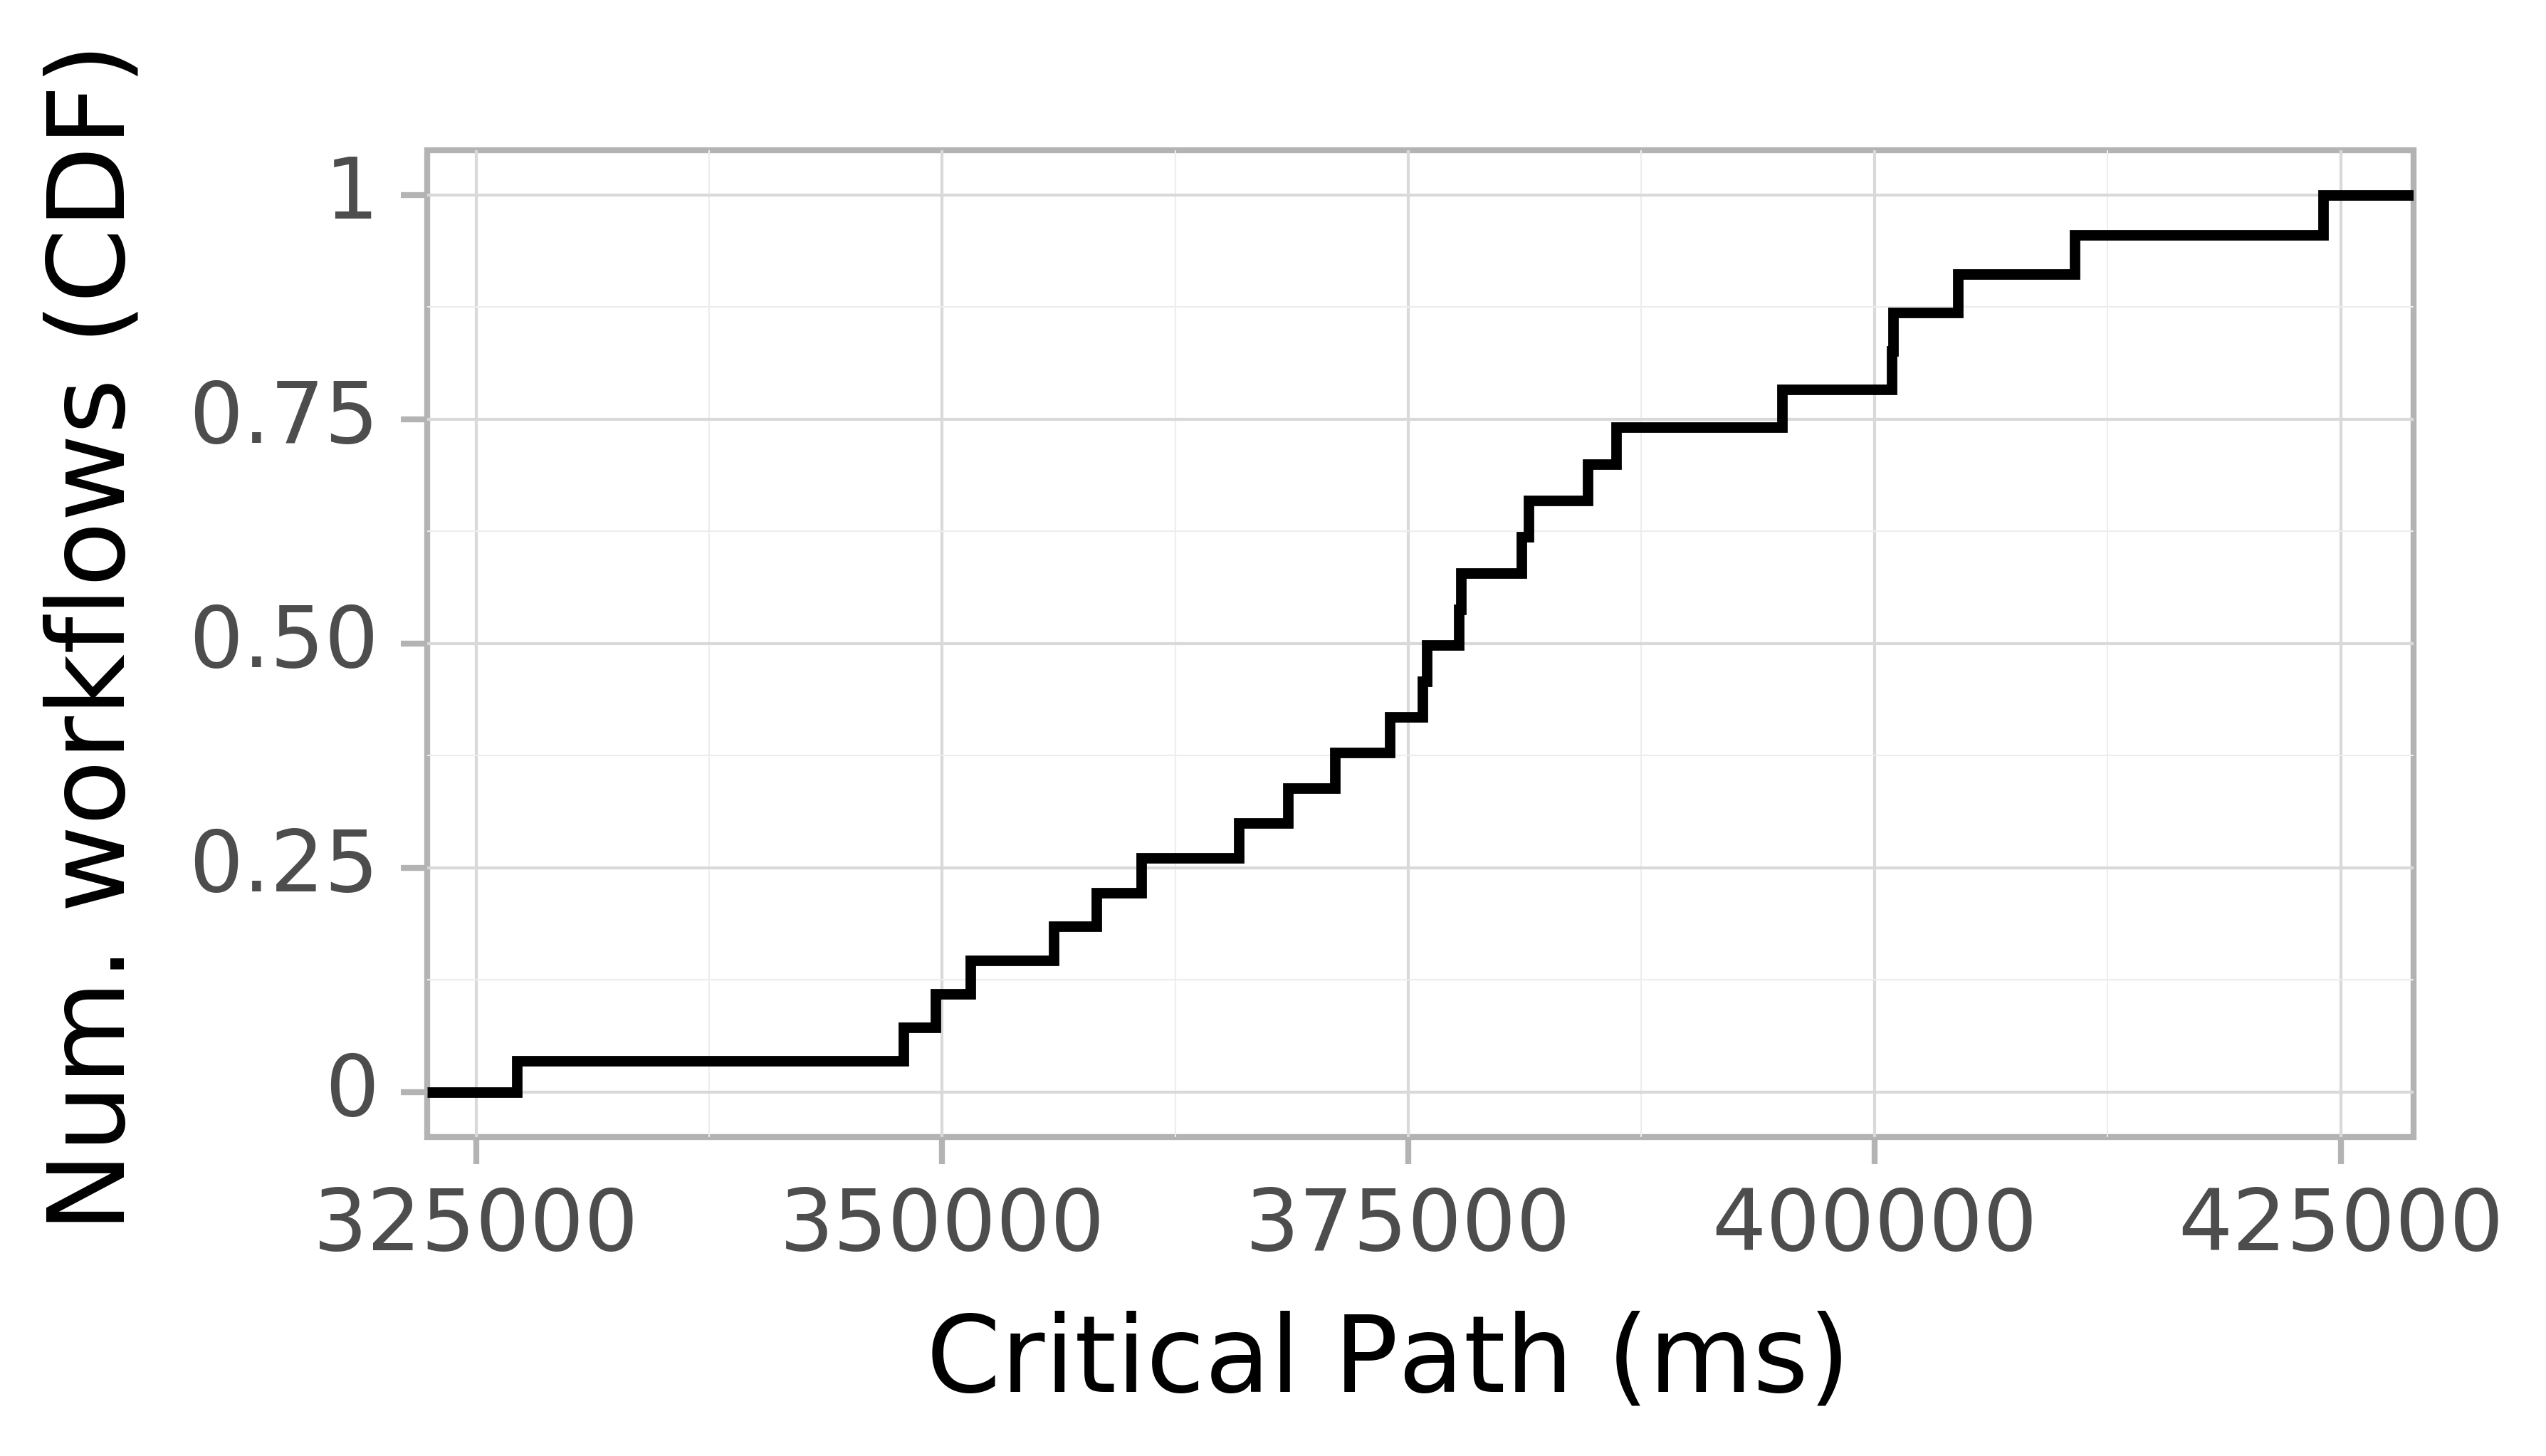 Job runtime CDF graph for the askalon-new_ee27 trace.